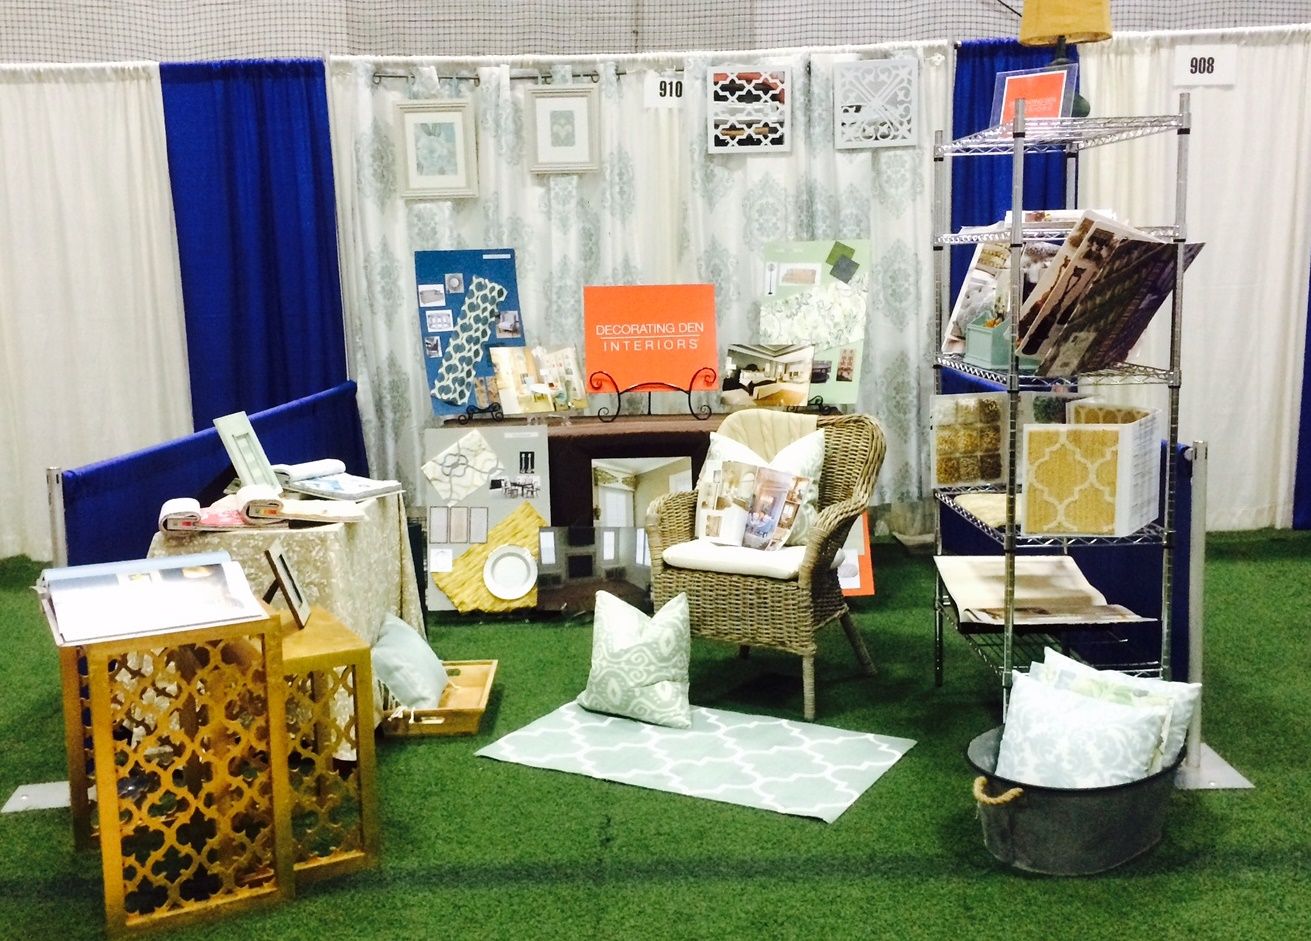 April at the Dulles Home Show